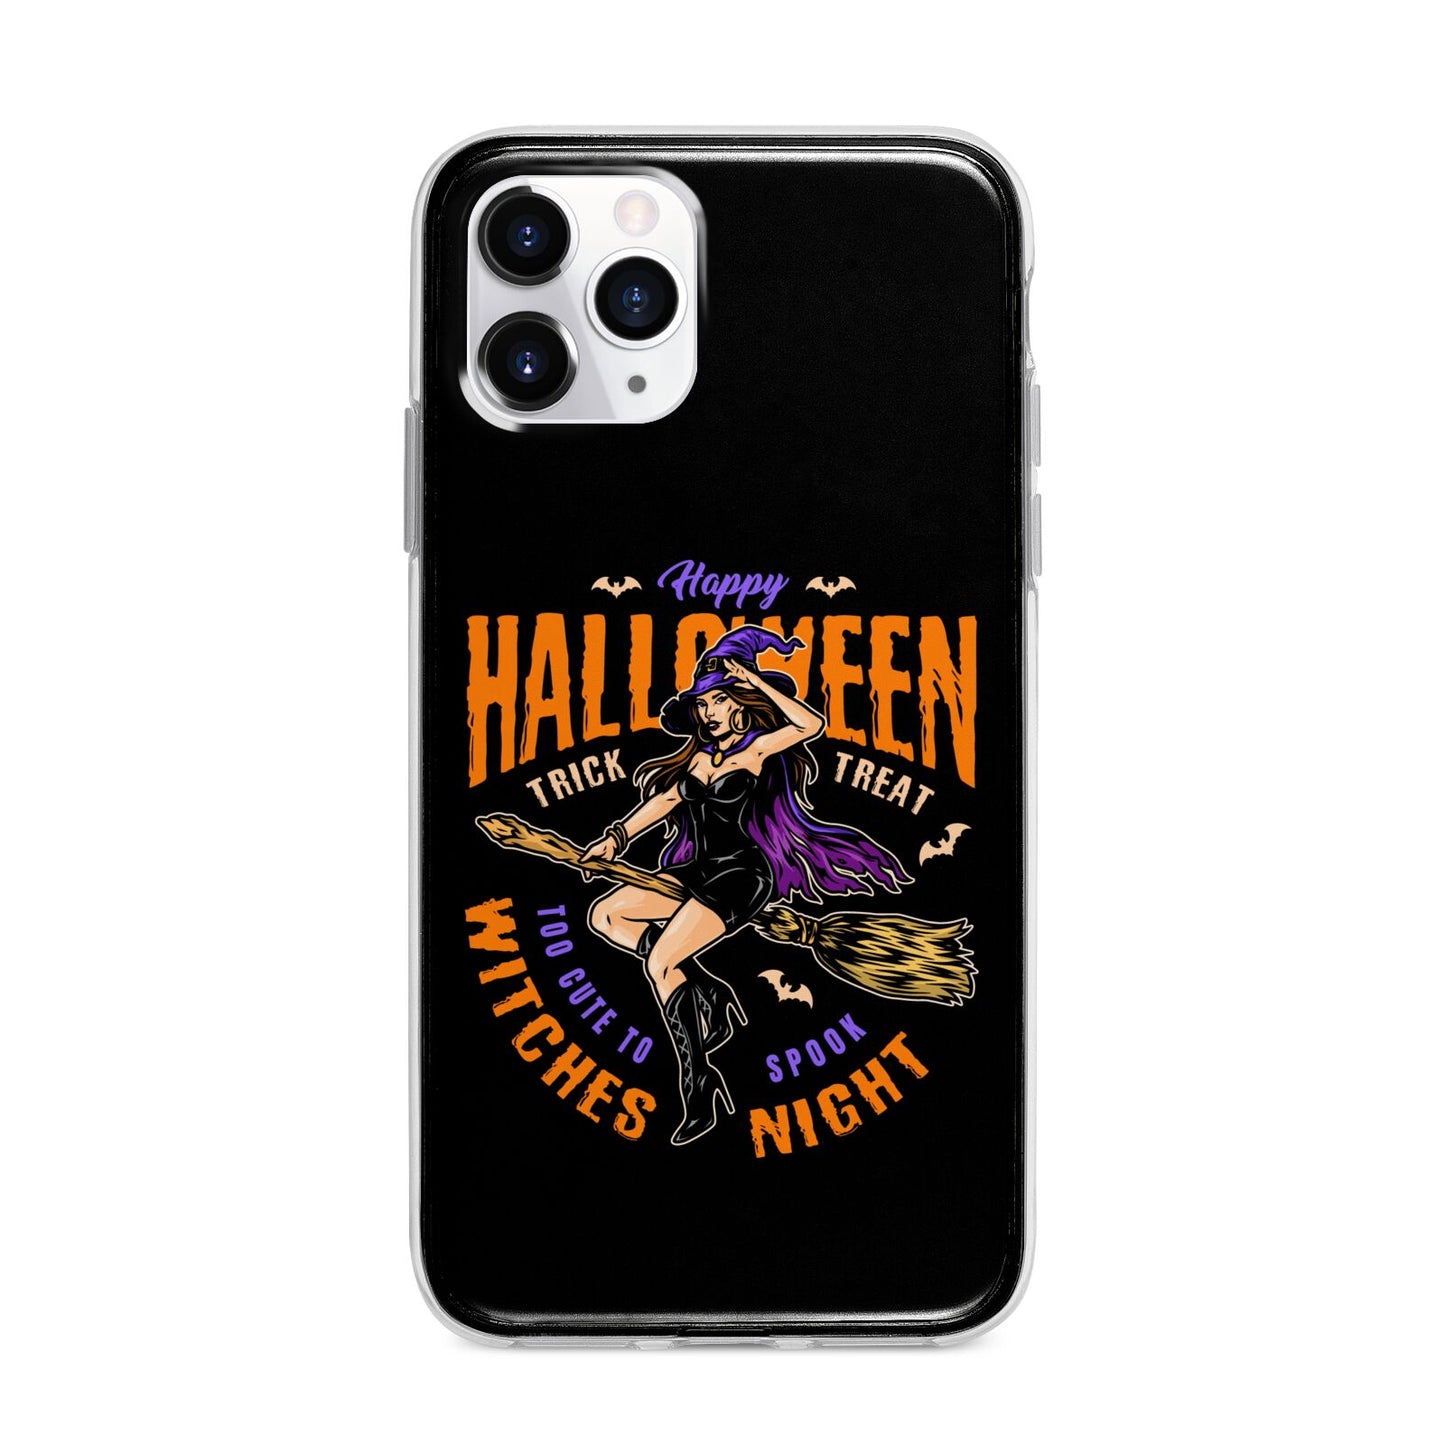 Witches Night Apple iPhone 11 Pro Max in Silver with Bumper Case